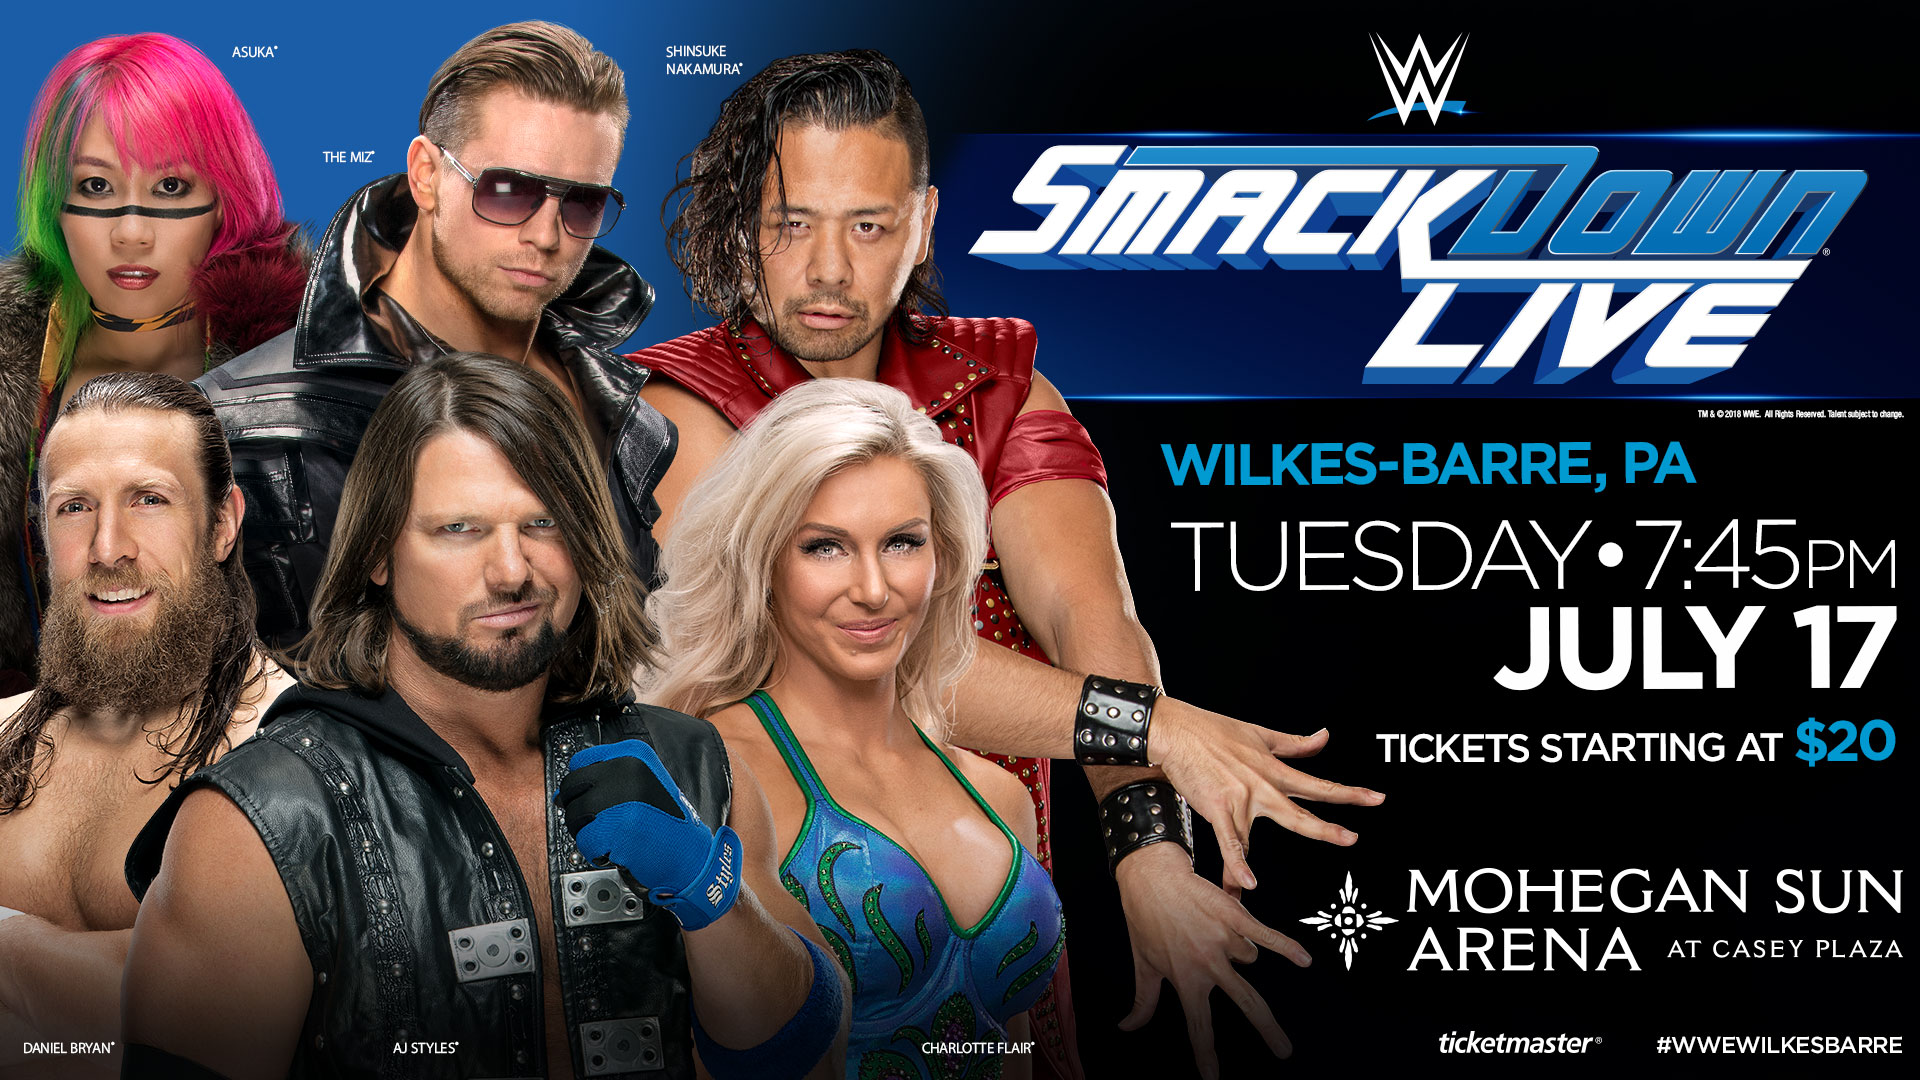 After soldout WilkesBarre event, 'WWE SmackDown' returns to Mohegan